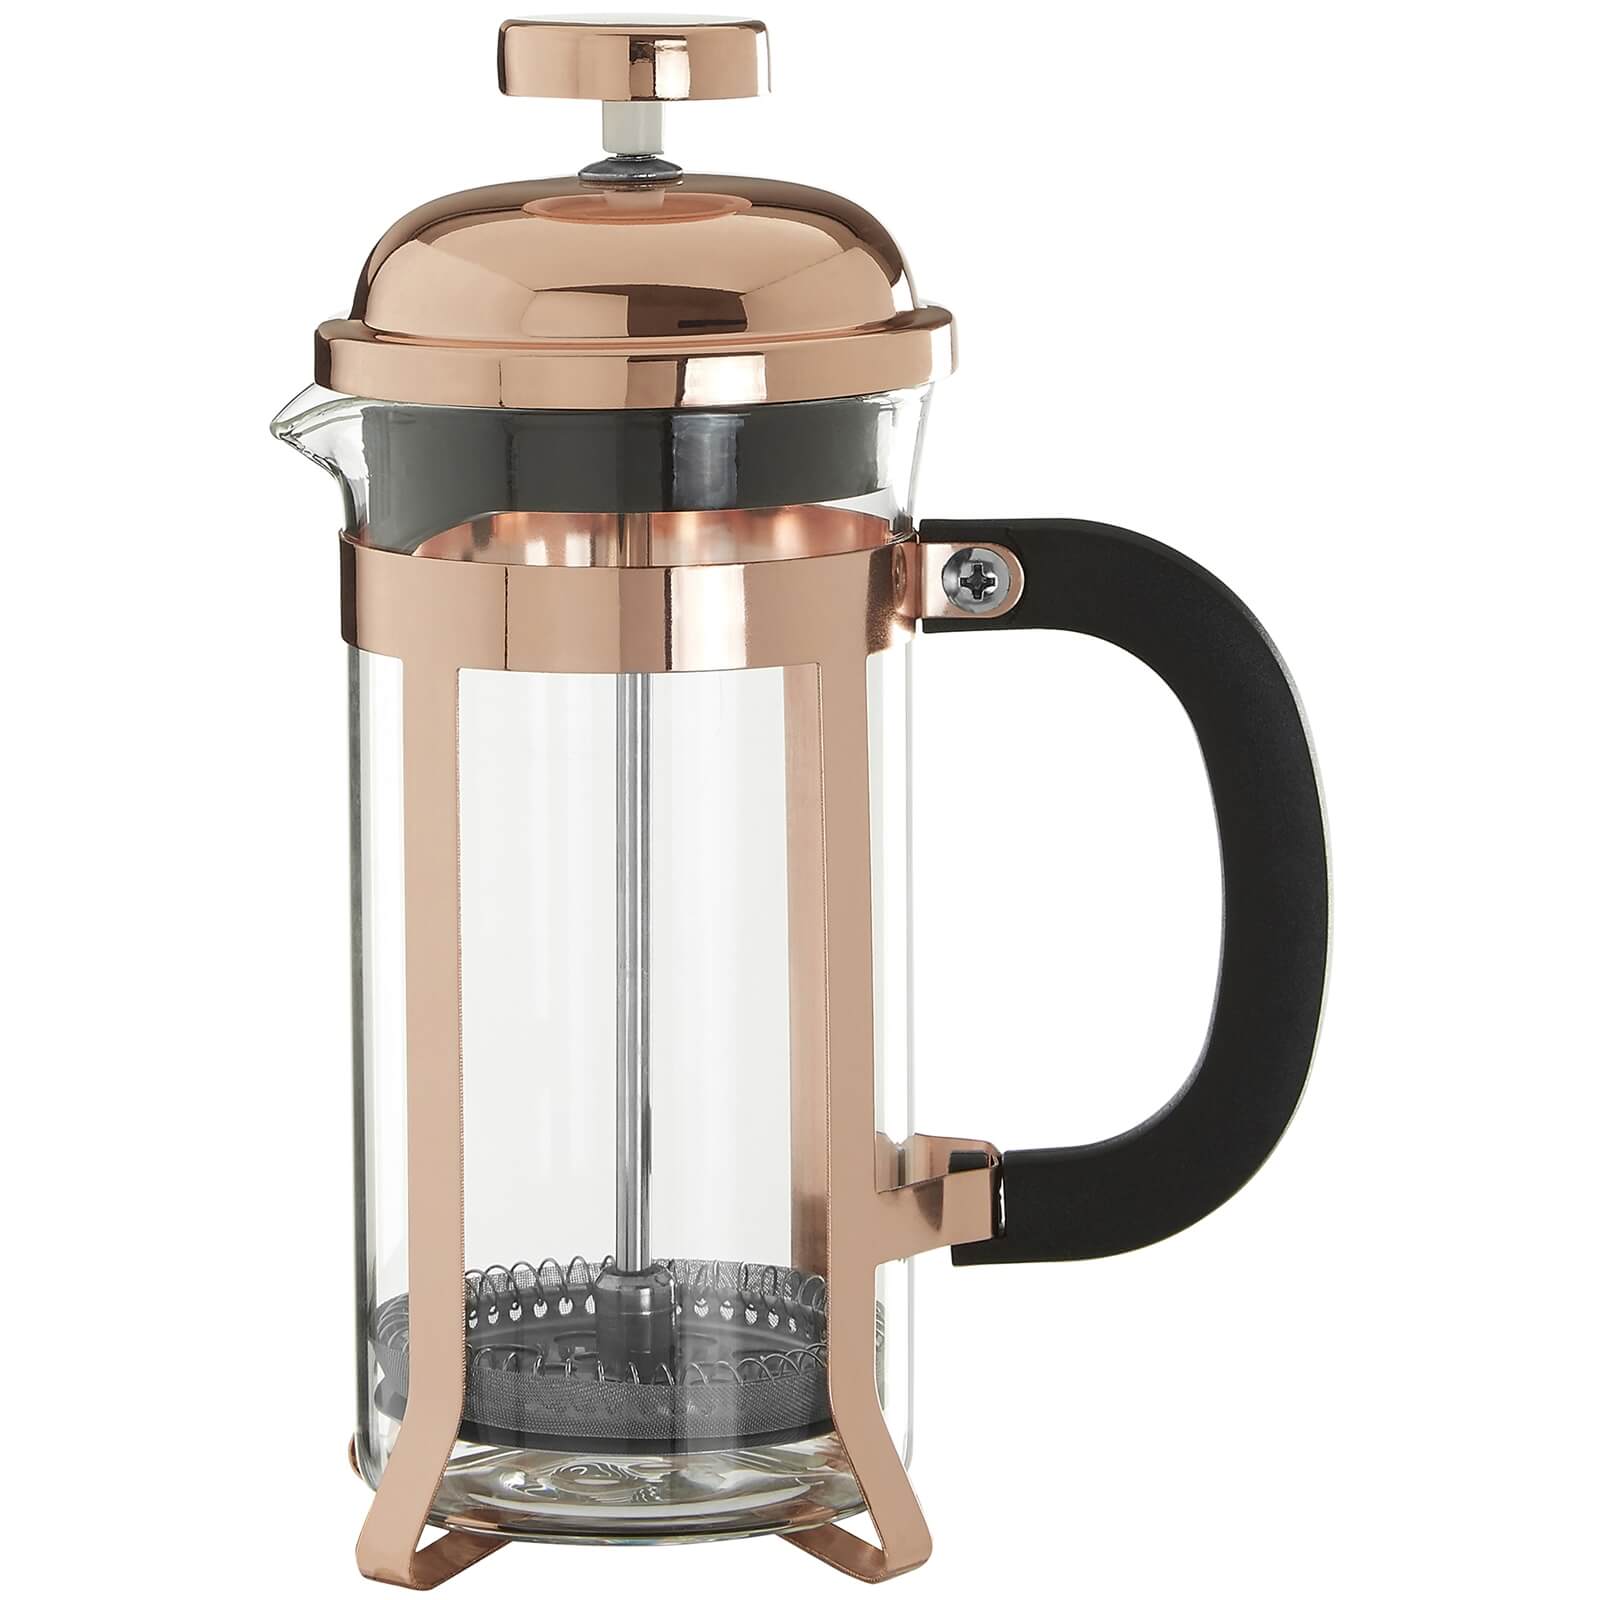 Allera Cafetiere - 350ml - Rose Gold Finish